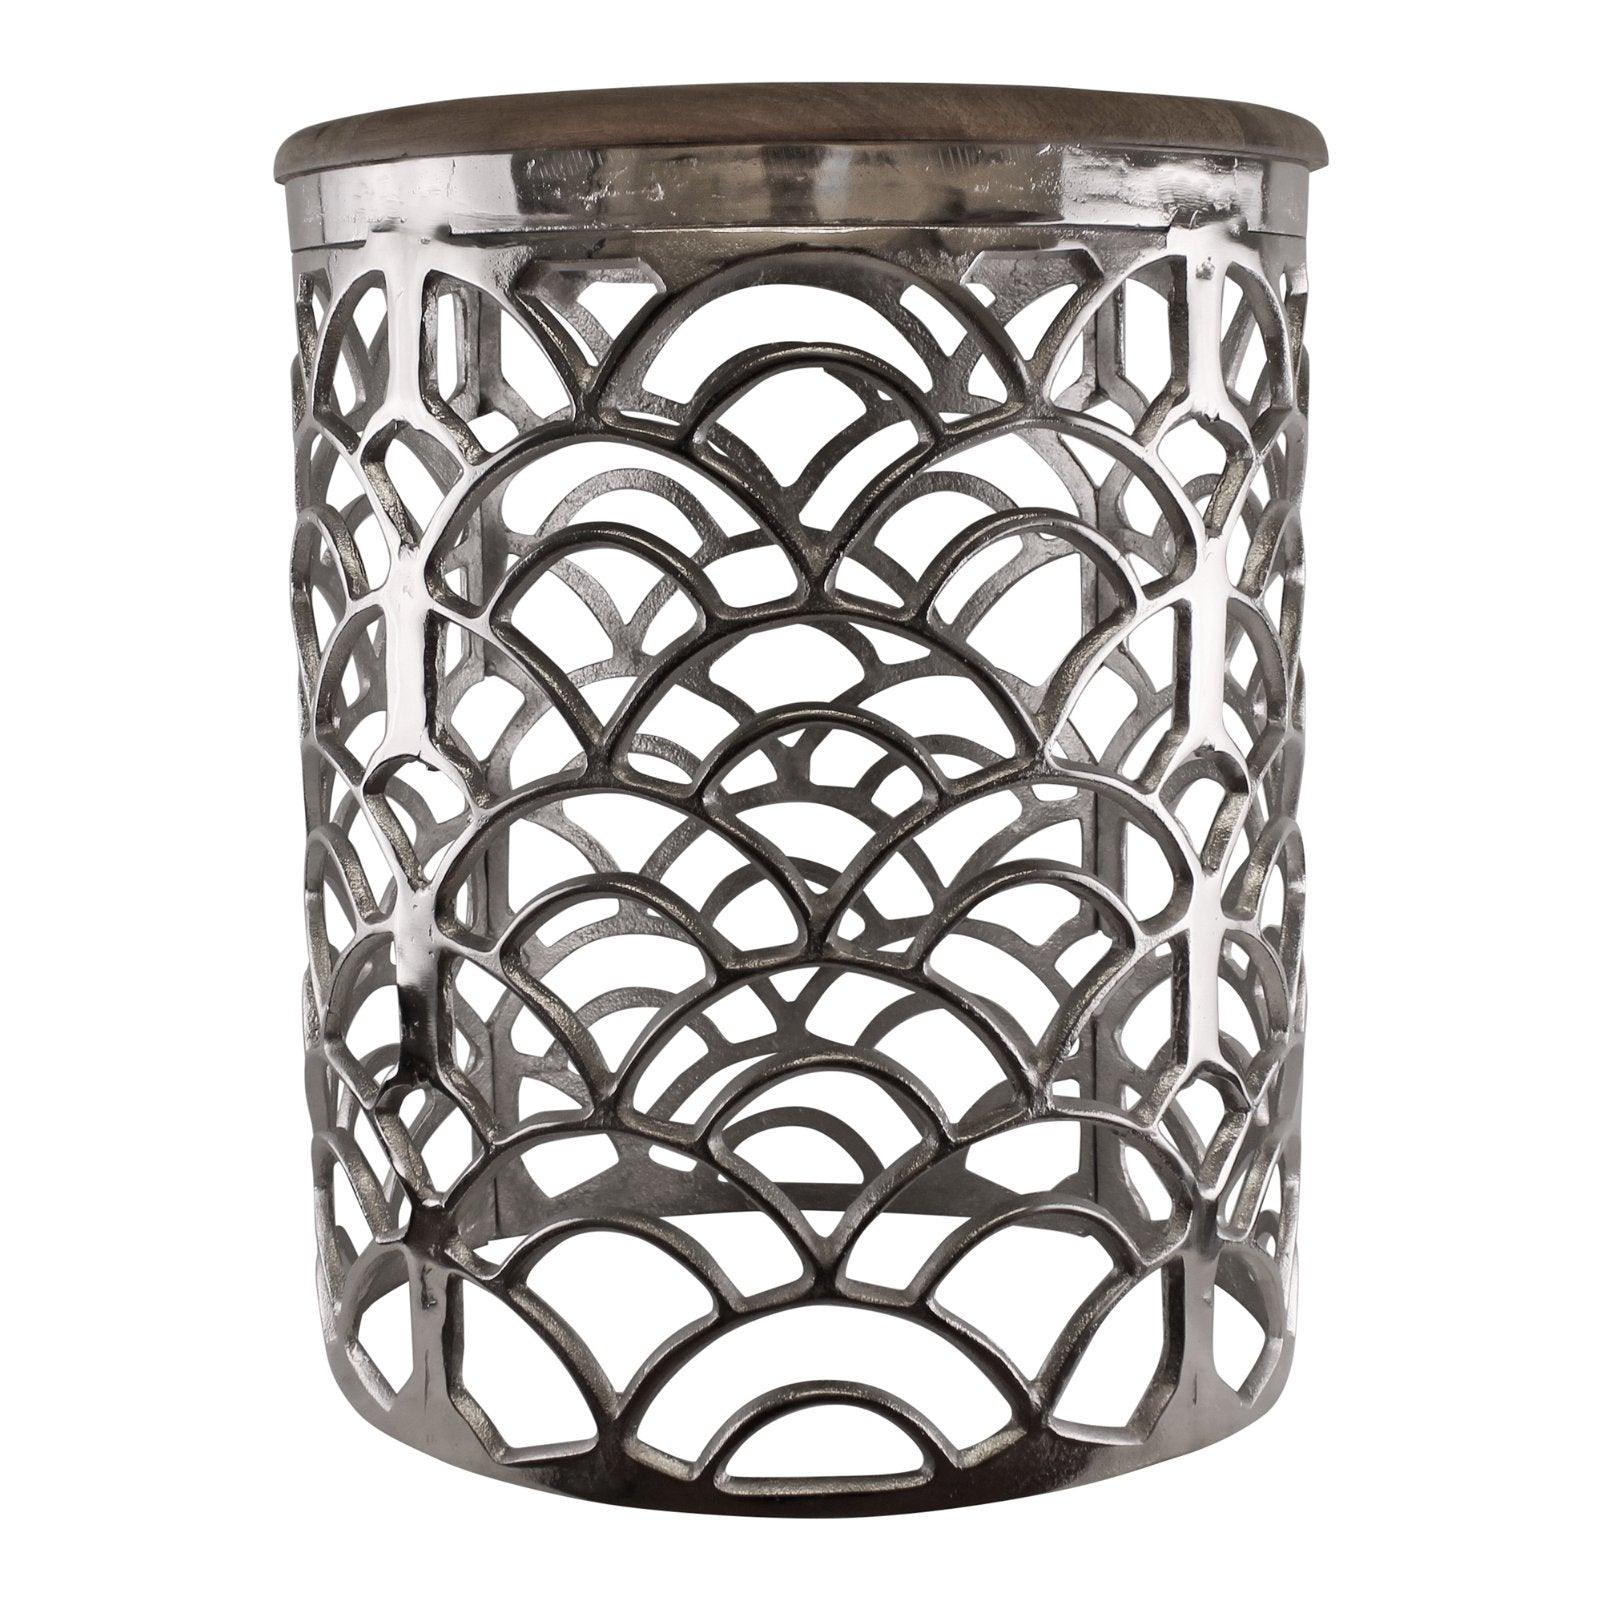 Decorative Silver Metal Side Table With A Wooden Top-Side Tables